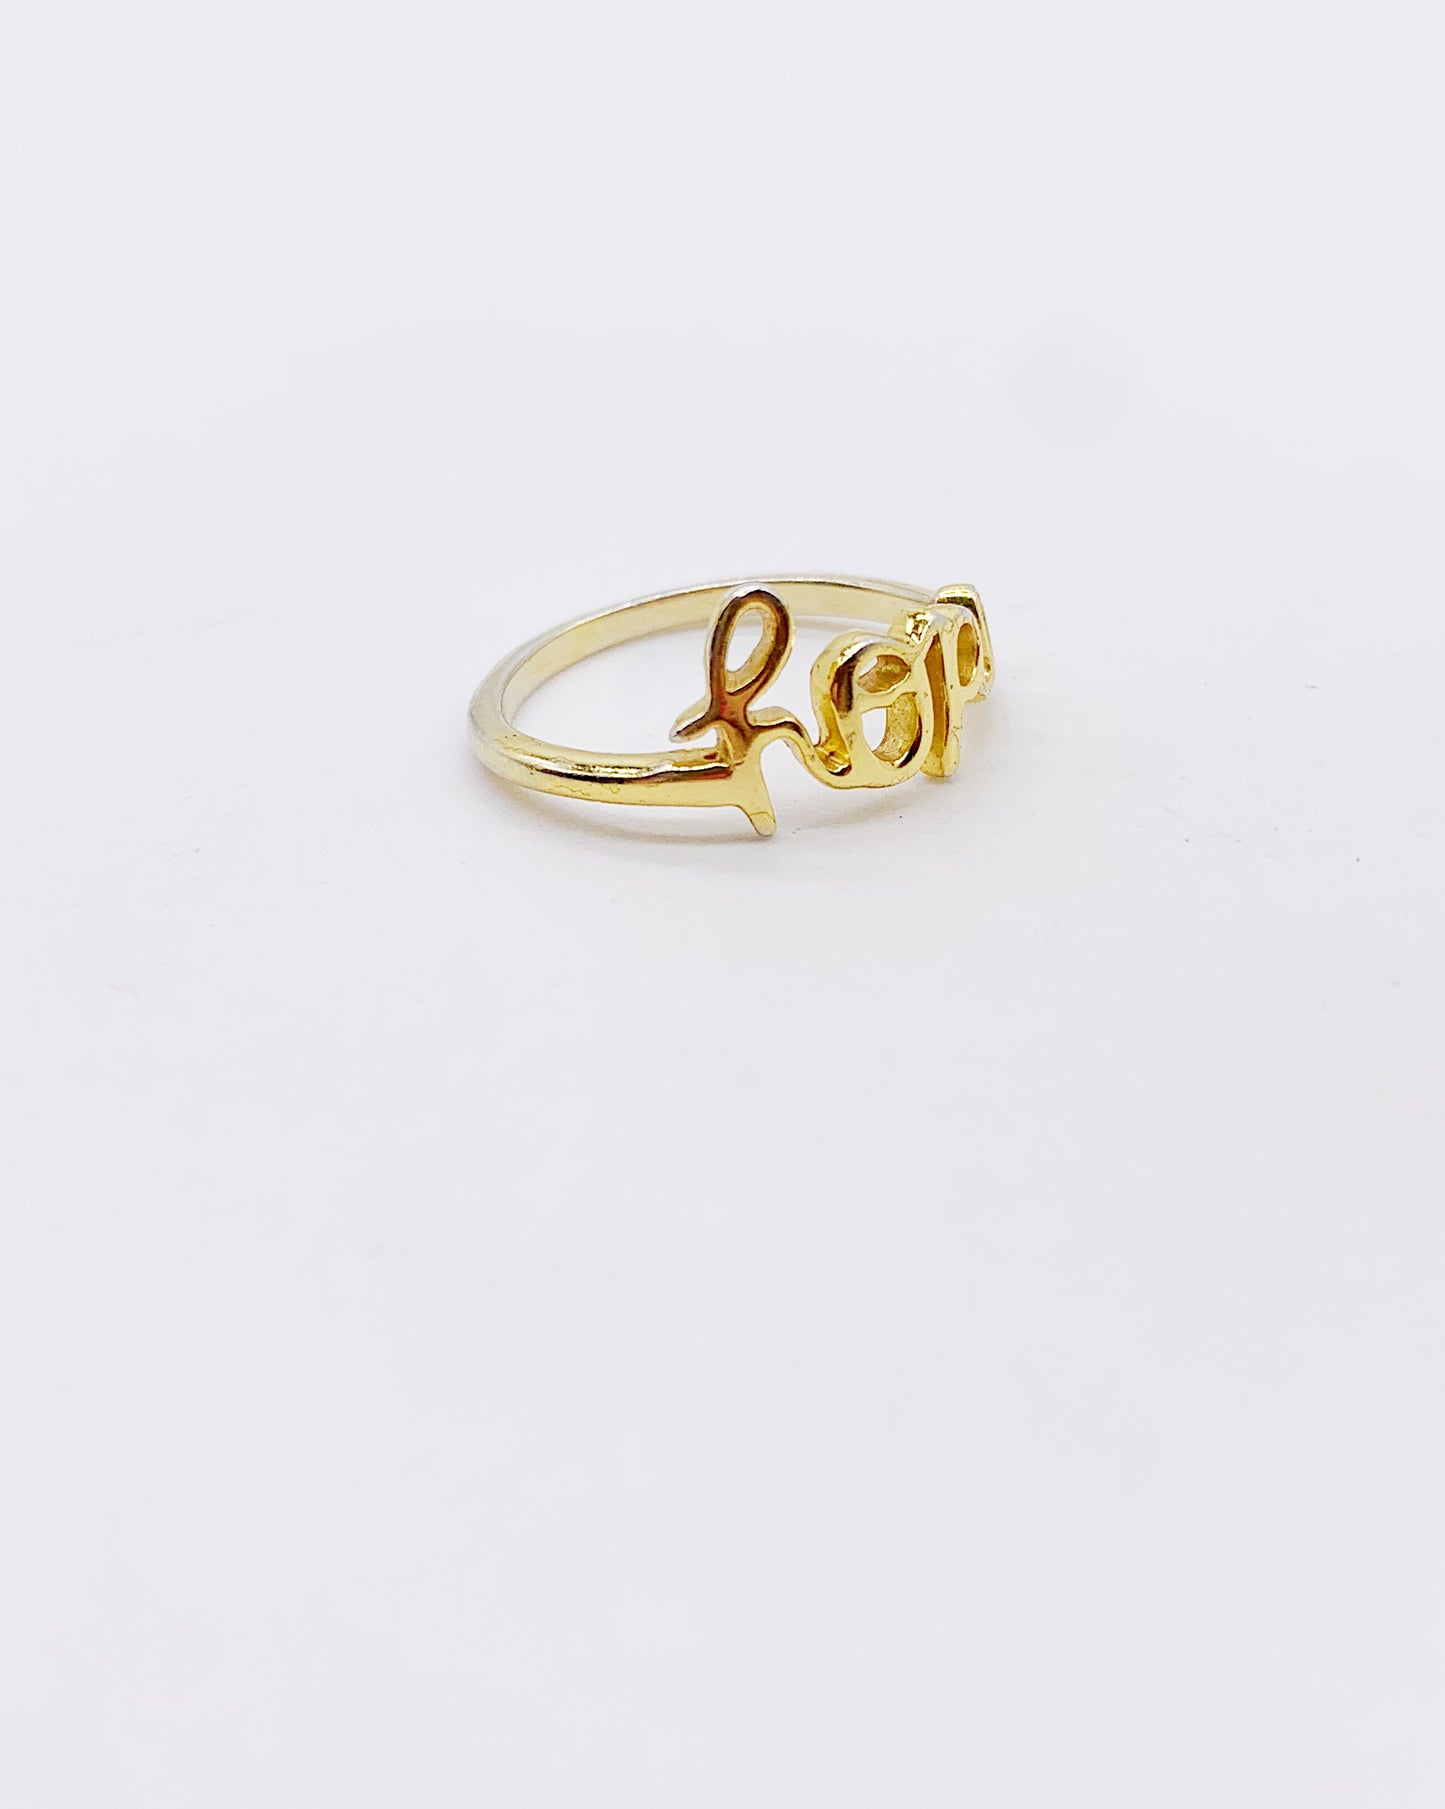 HOPE GOLD RING